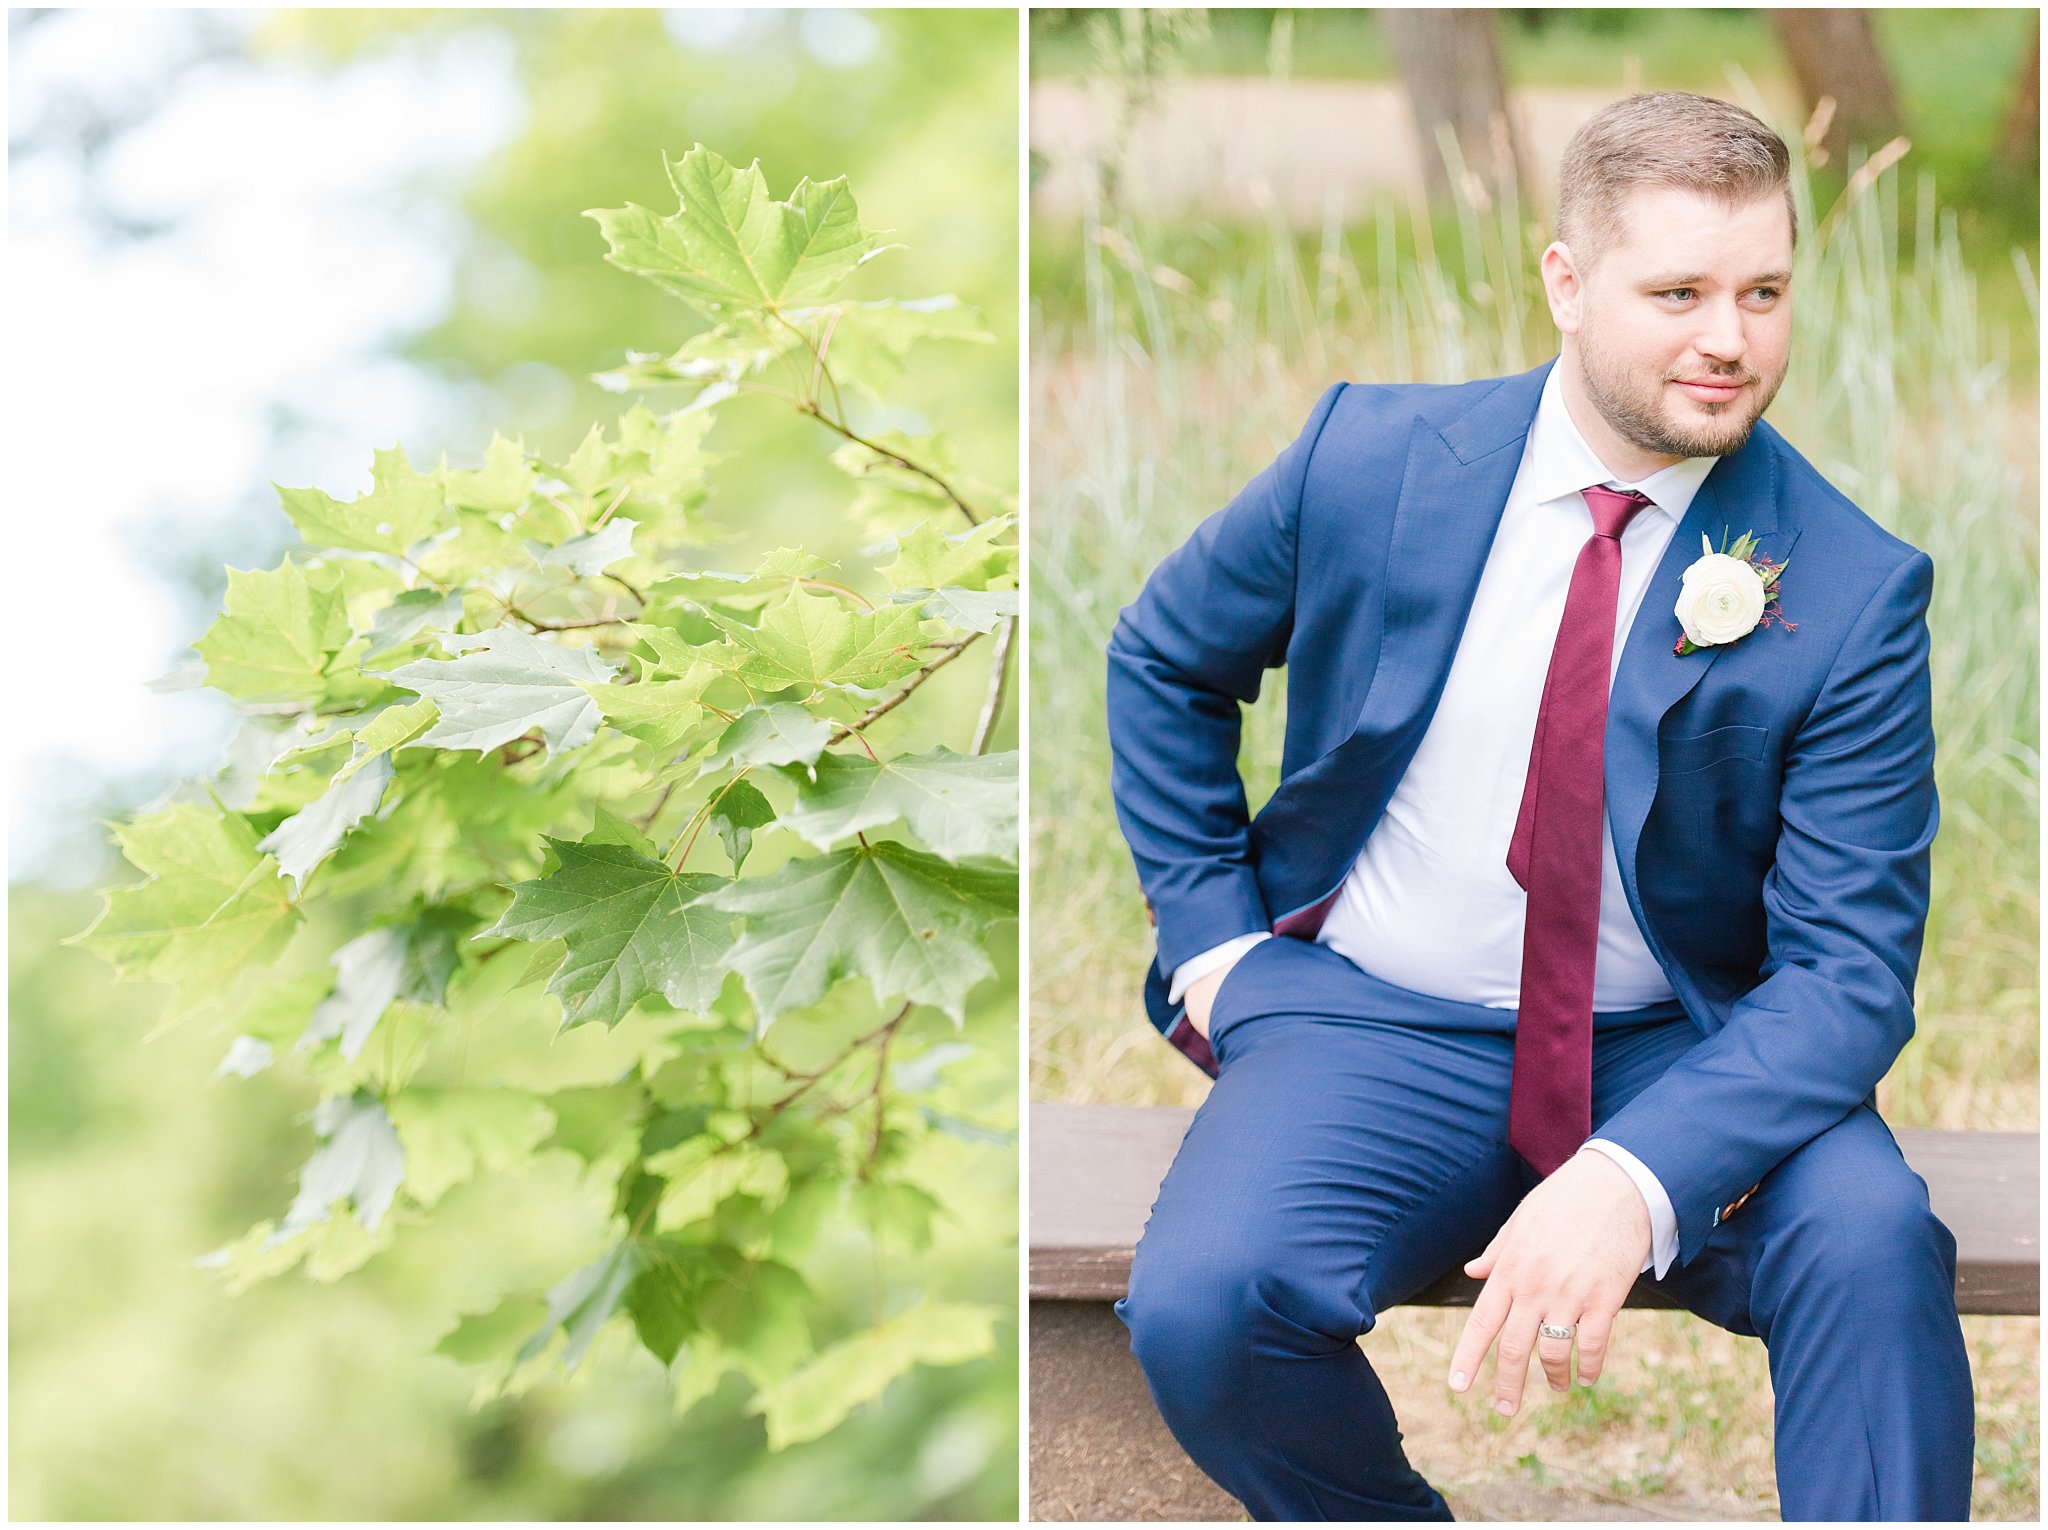 Groom portraits in navy suit with wine colored tie in the mountains | Navy, wine, and gold wedding colors | Bountiful Temple and Mueller Park Formal Session | Utah Wedding Photographers | Jessie and Dallin Photography